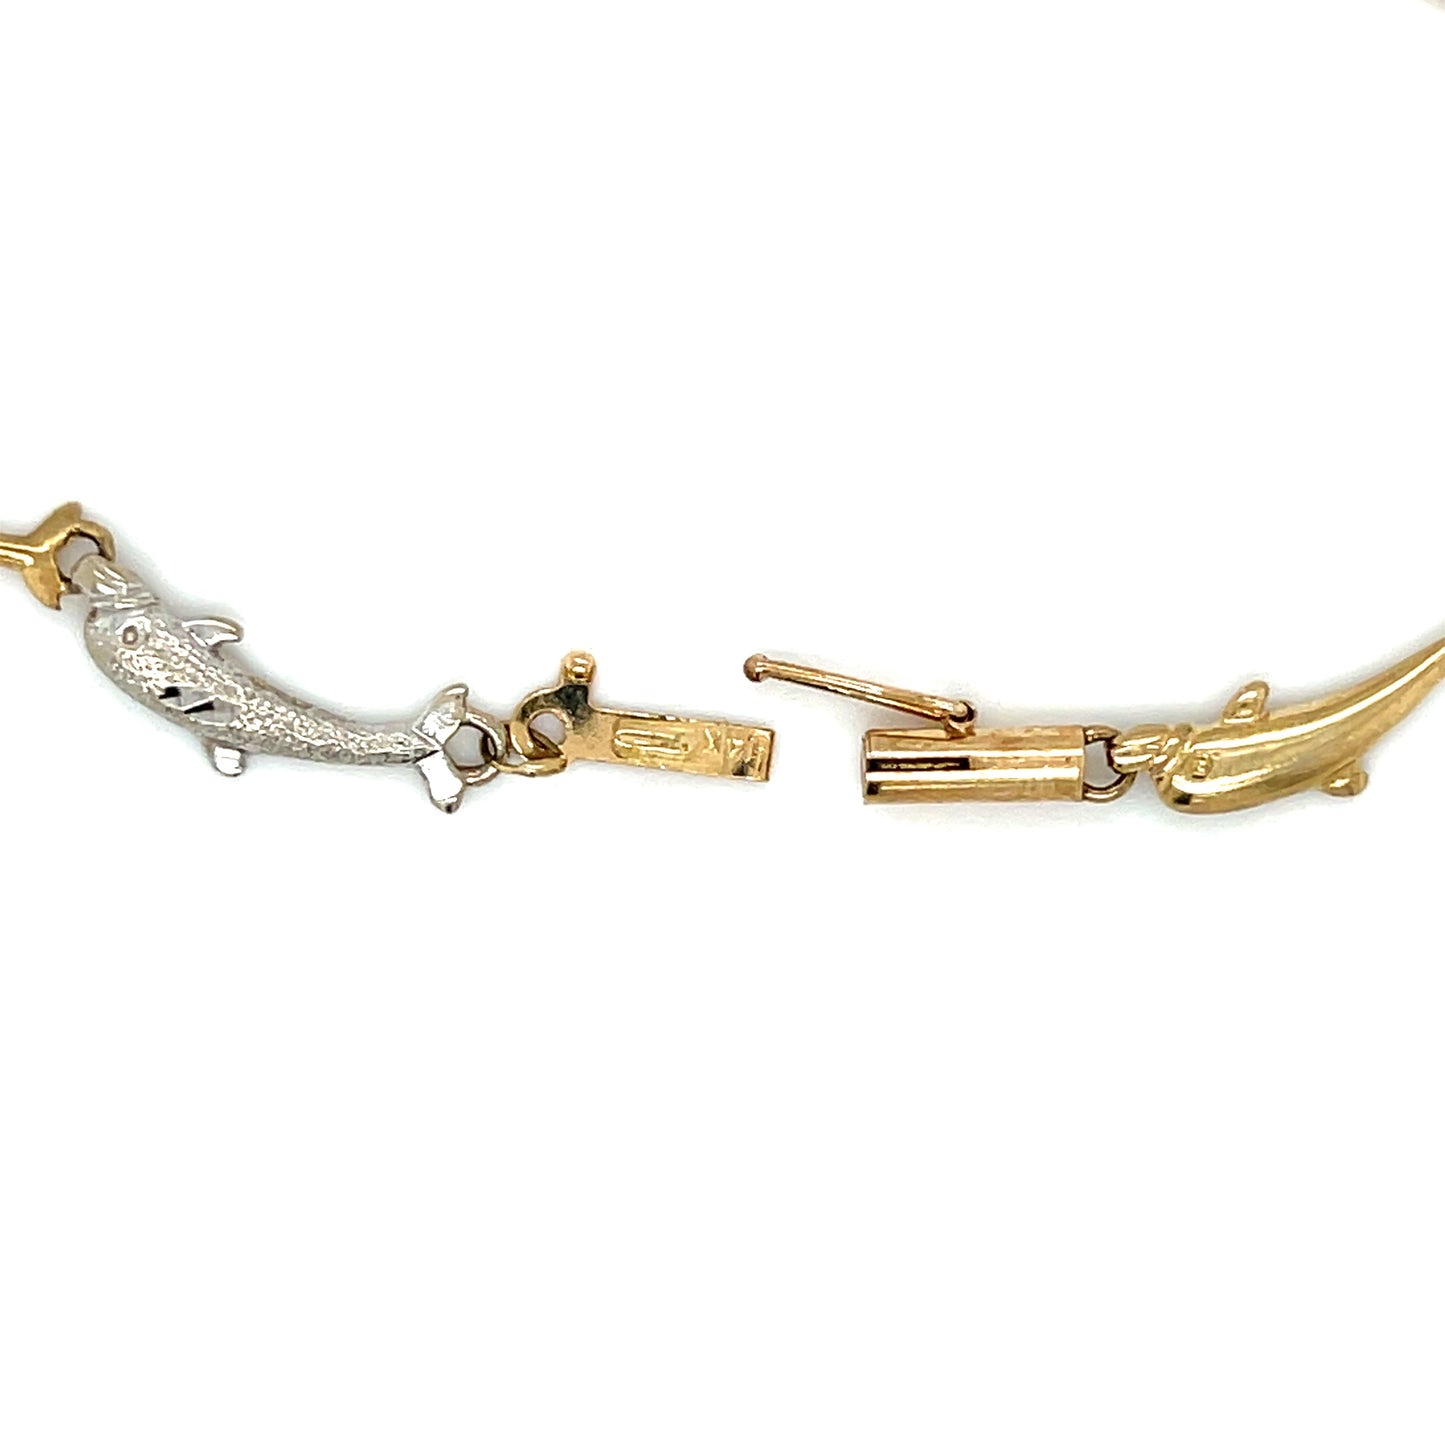 Dolphin Link Estate Bracelet in 14-Karat Yellow and White Gold